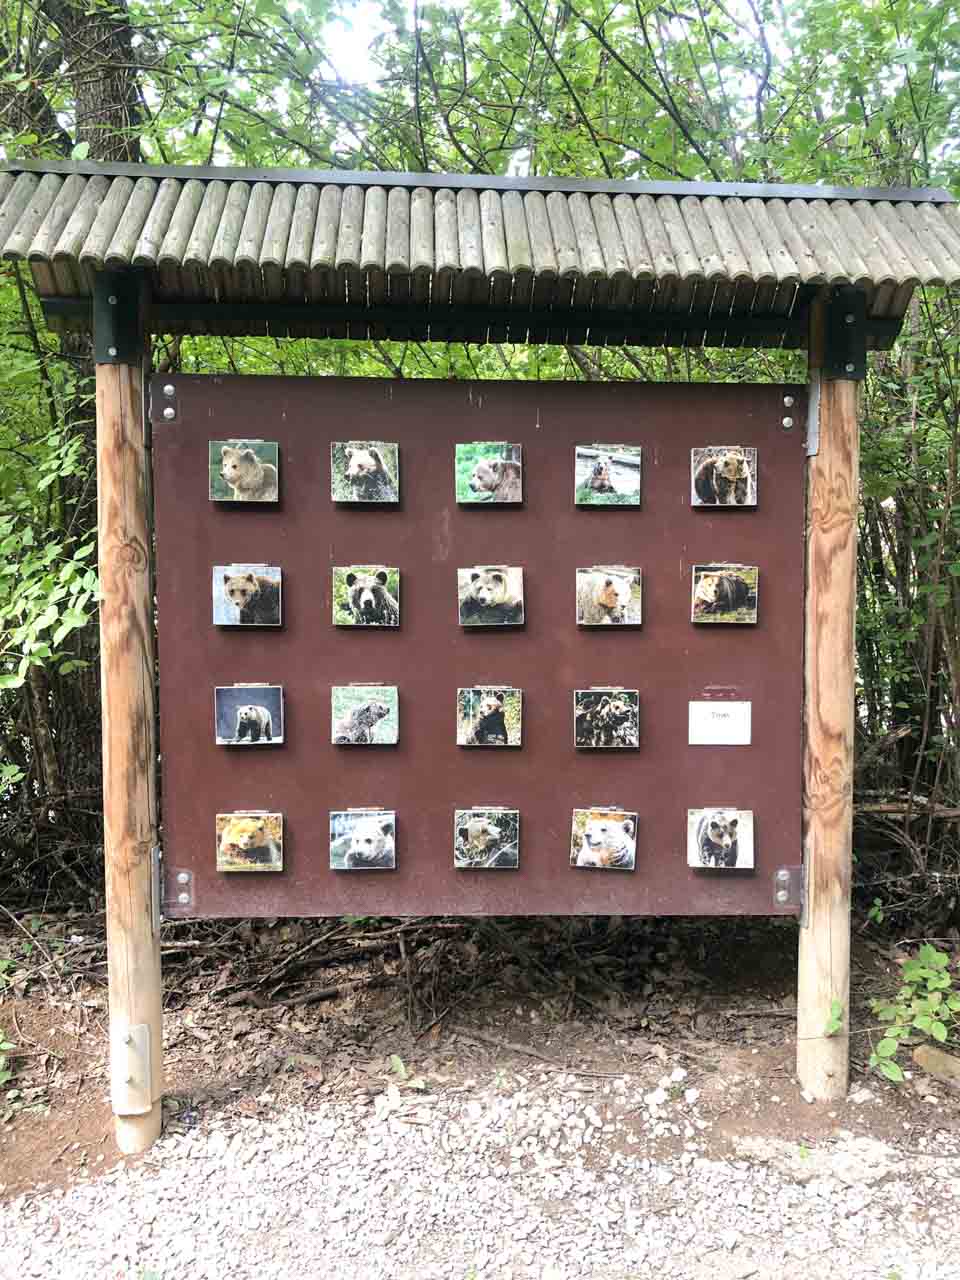 Display showing photos of all the bears living at the Pristina Bear Sanctuary